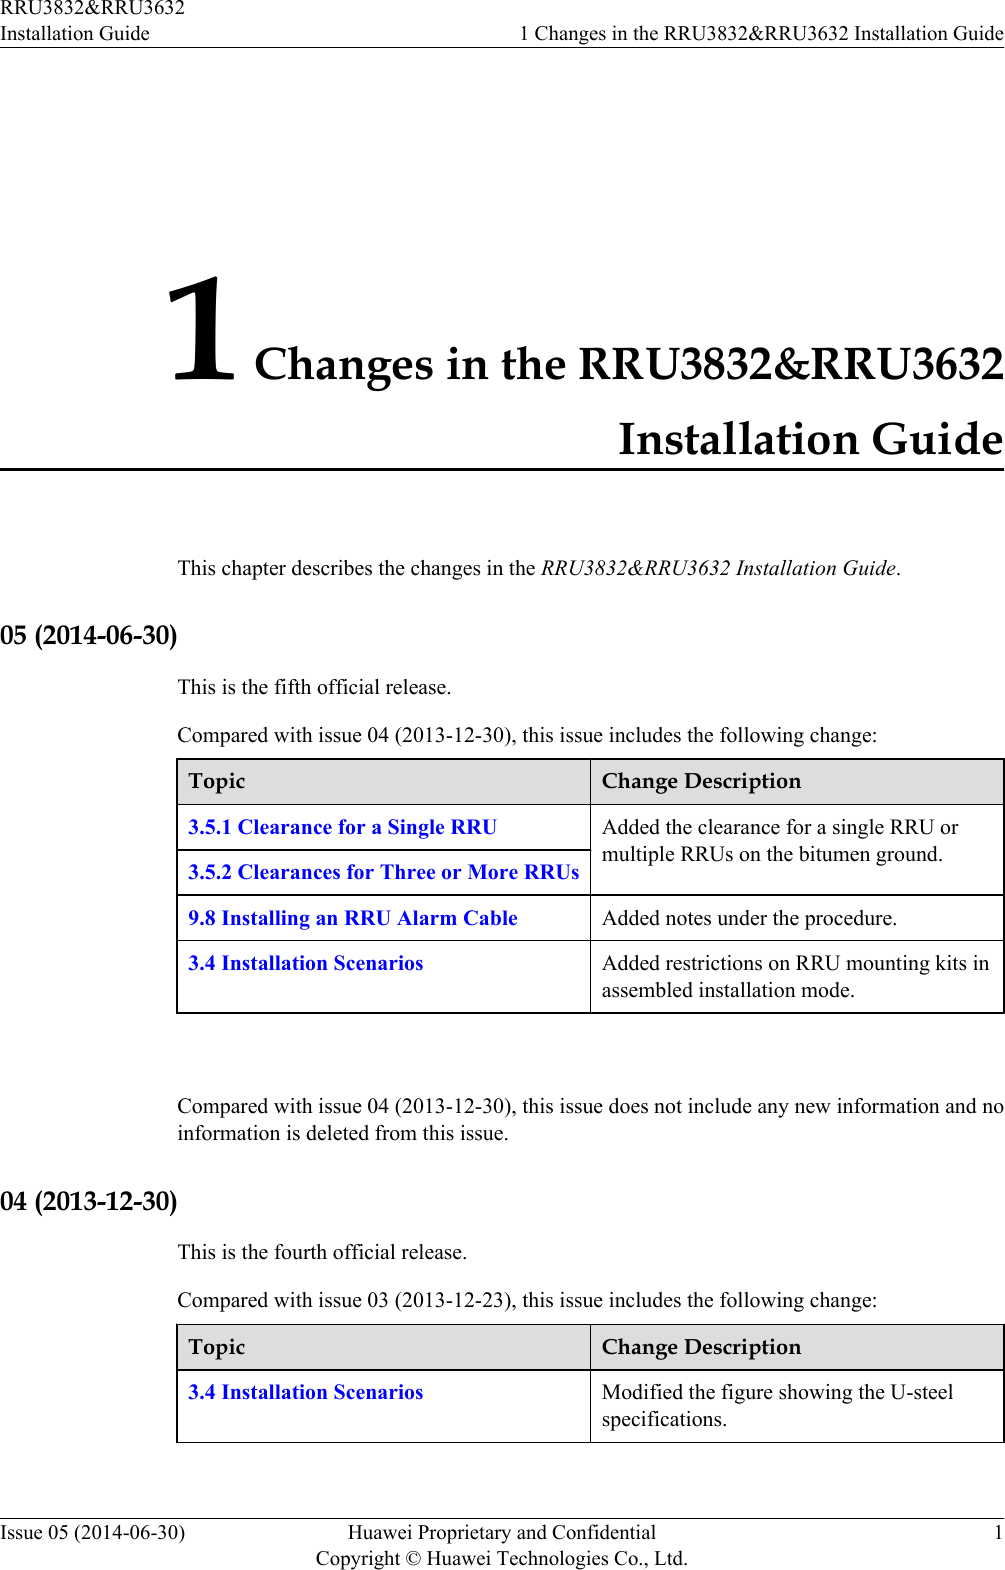 1 Changes in the RRU3832&amp;RRU3632Installation GuideThis chapter describes the changes in the RRU3832&amp;RRU3632 Installation Guide.05 (2014-06-30)This is the fifth official release.Compared with issue 04 (2013-12-30), this issue includes the following change:Topic Change Description3.5.1 Clearance for a Single RRU Added the clearance for a single RRU ormultiple RRUs on the bitumen ground.3.5.2 Clearances for Three or More RRUs9.8 Installing an RRU Alarm Cable Added notes under the procedure.3.4 Installation Scenarios Added restrictions on RRU mounting kits inassembled installation mode. Compared with issue 04 (2013-12-30), this issue does not include any new information and noinformation is deleted from this issue.04 (2013-12-30)This is the fourth official release.Compared with issue 03 (2013-12-23), this issue includes the following change:Topic Change Description3.4 Installation Scenarios Modified the figure showing the U-steelspecifications. RRU3832&amp;RRU3632Installation Guide 1 Changes in the RRU3832&amp;RRU3632 Installation GuideIssue 05 (2014-06-30) Huawei Proprietary and ConfidentialCopyright © Huawei Technologies Co., Ltd.1